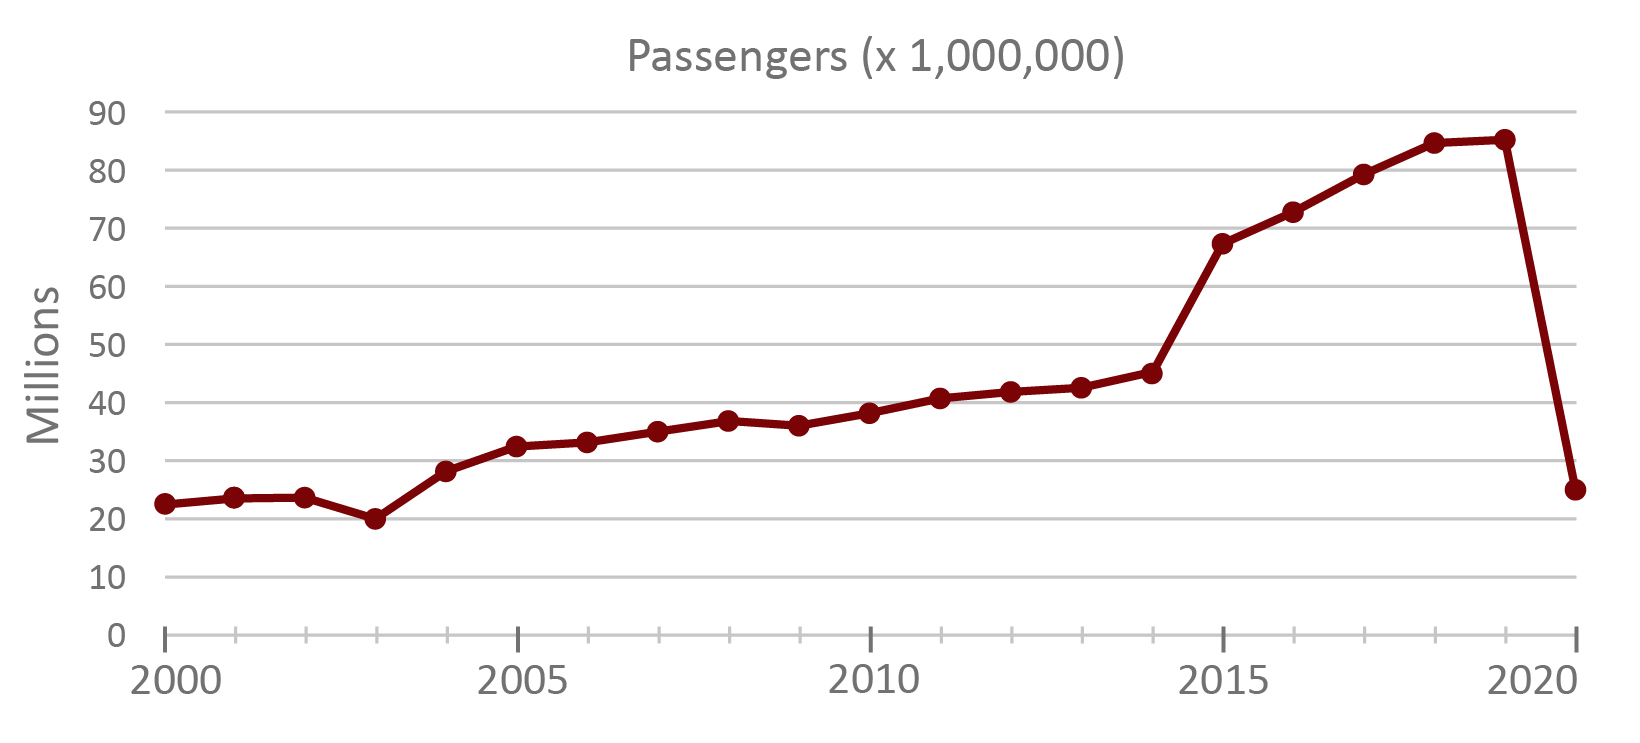 Figure 5: Passengers flown on major Canadian airlines in millions